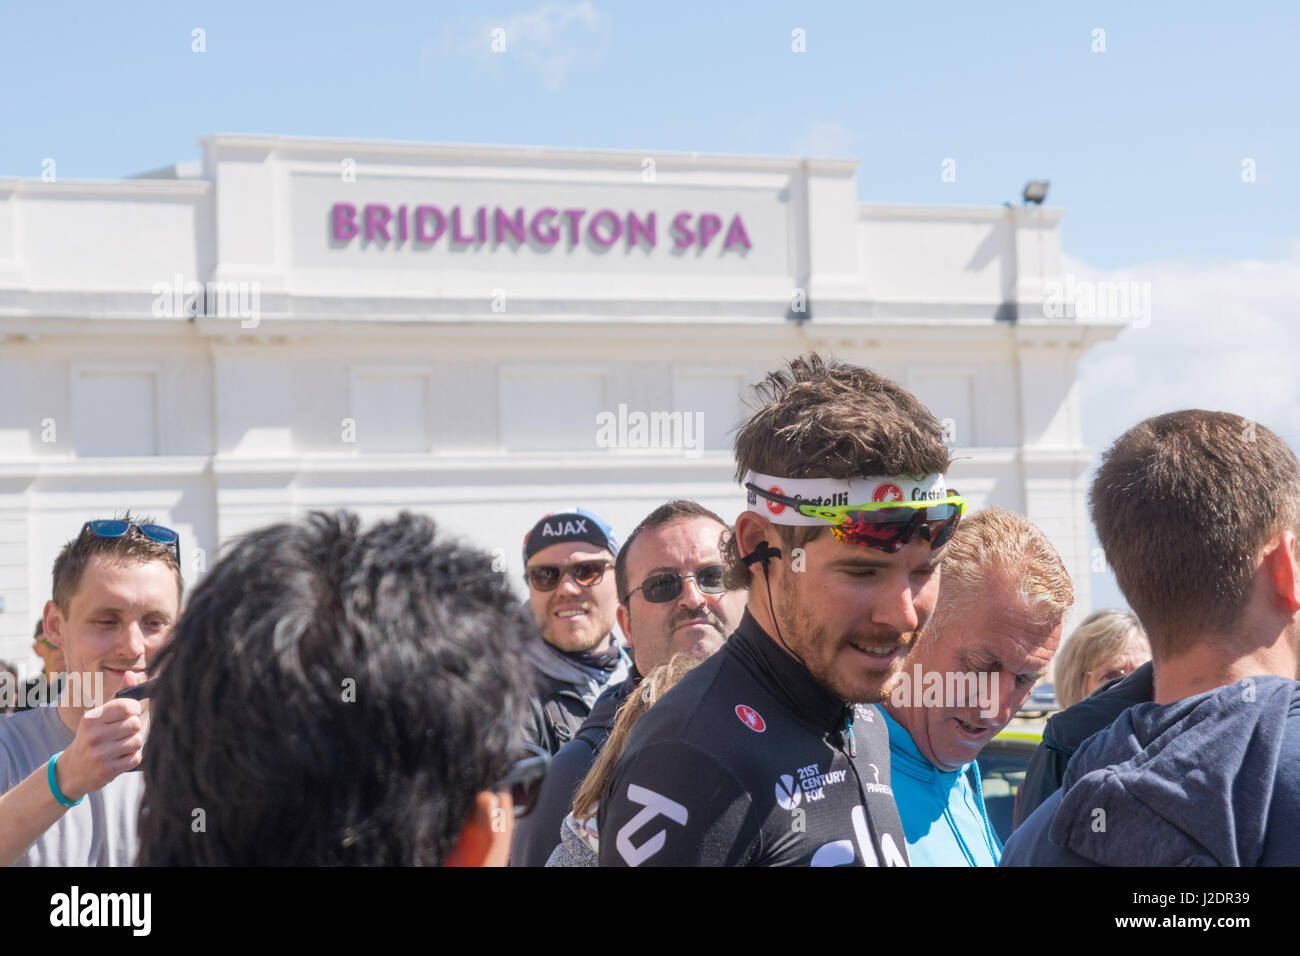 Bridlington, UK. 28th Apr, 2017. In front of the Bridlington Spa, Team Sky rider chats to the public. Credit: Richard Smith/Alamy Live News Stock Photo